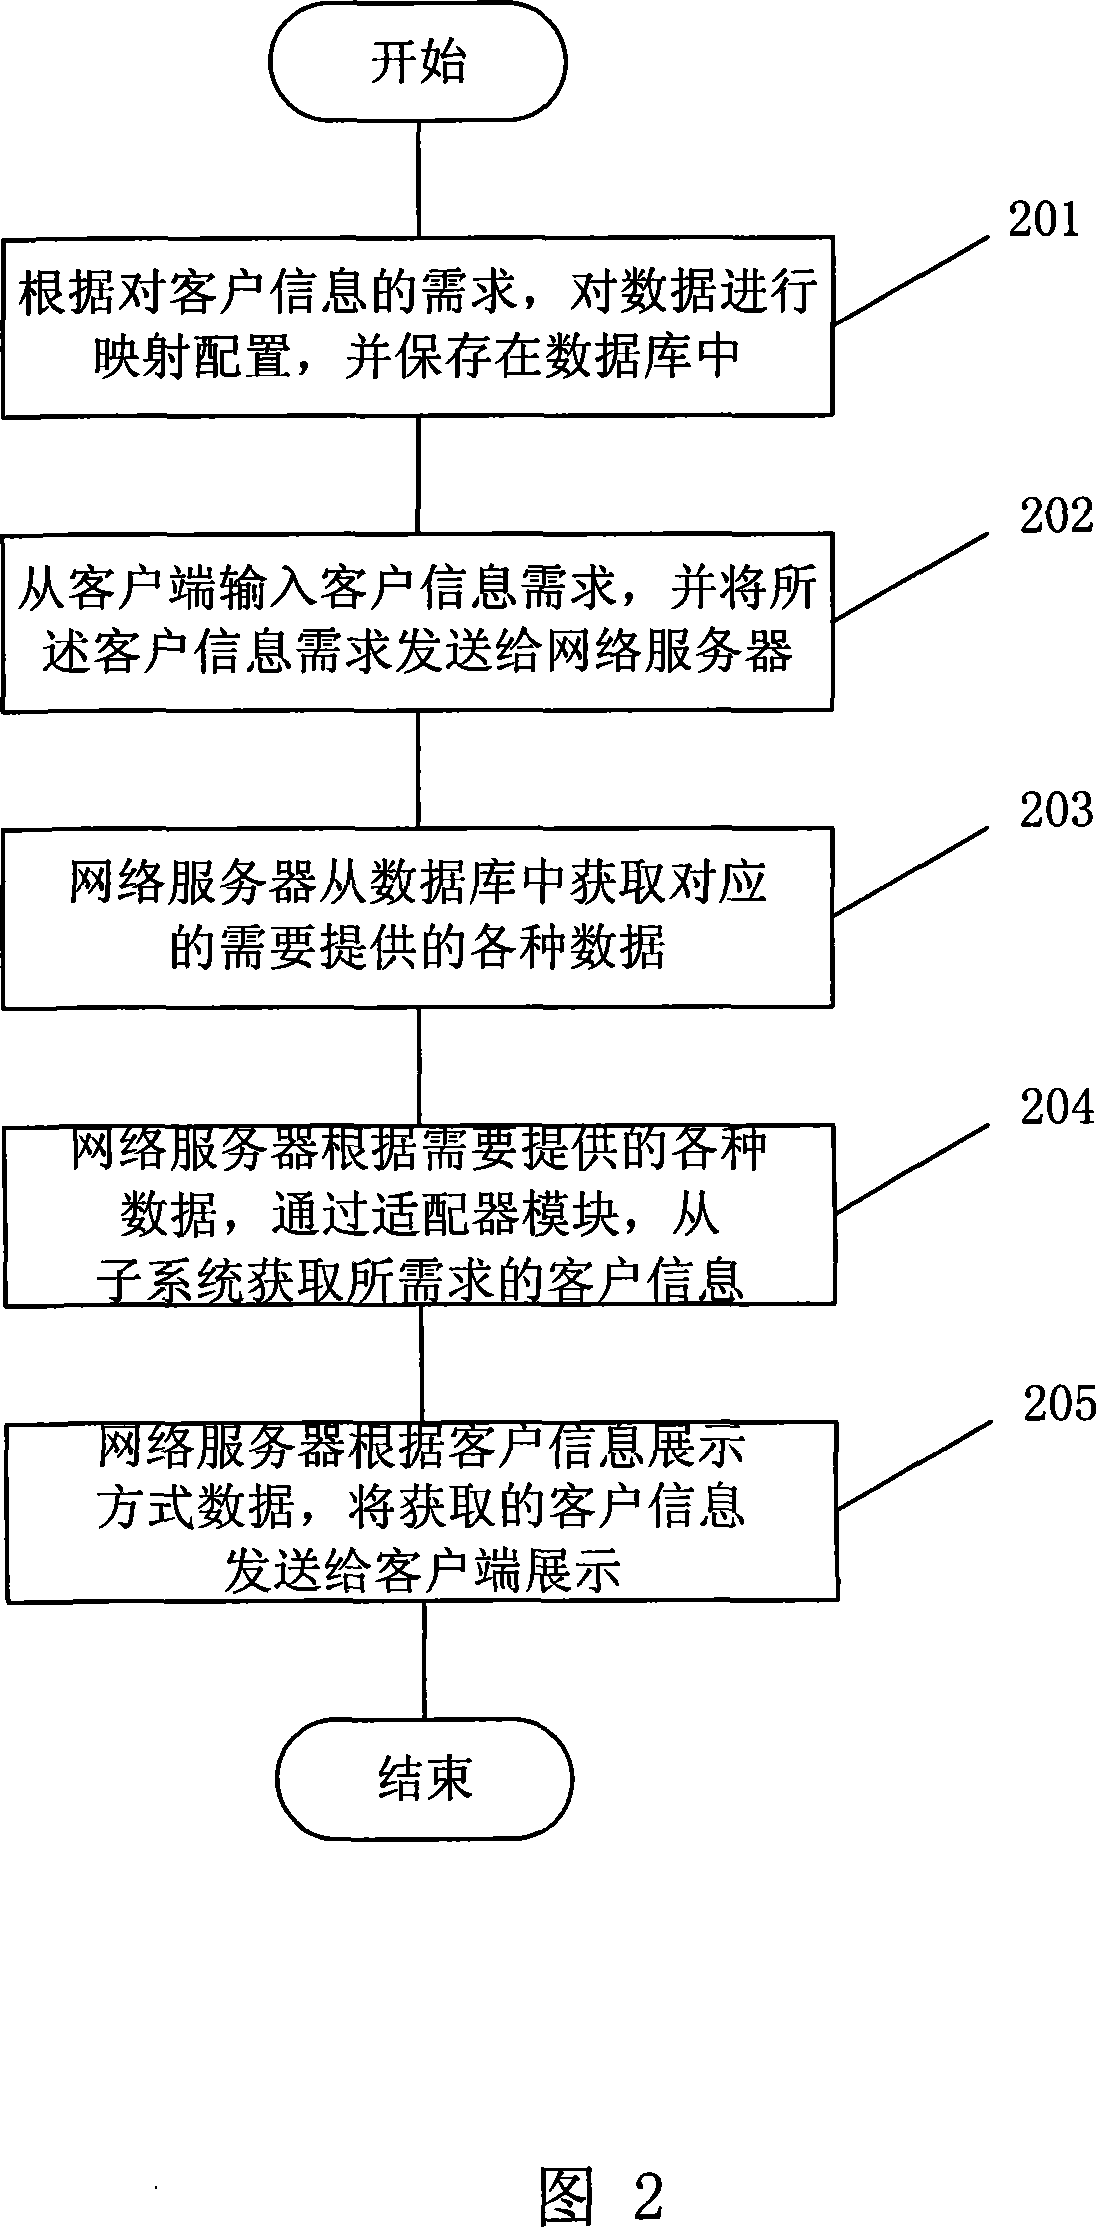 Method and system for providing client information